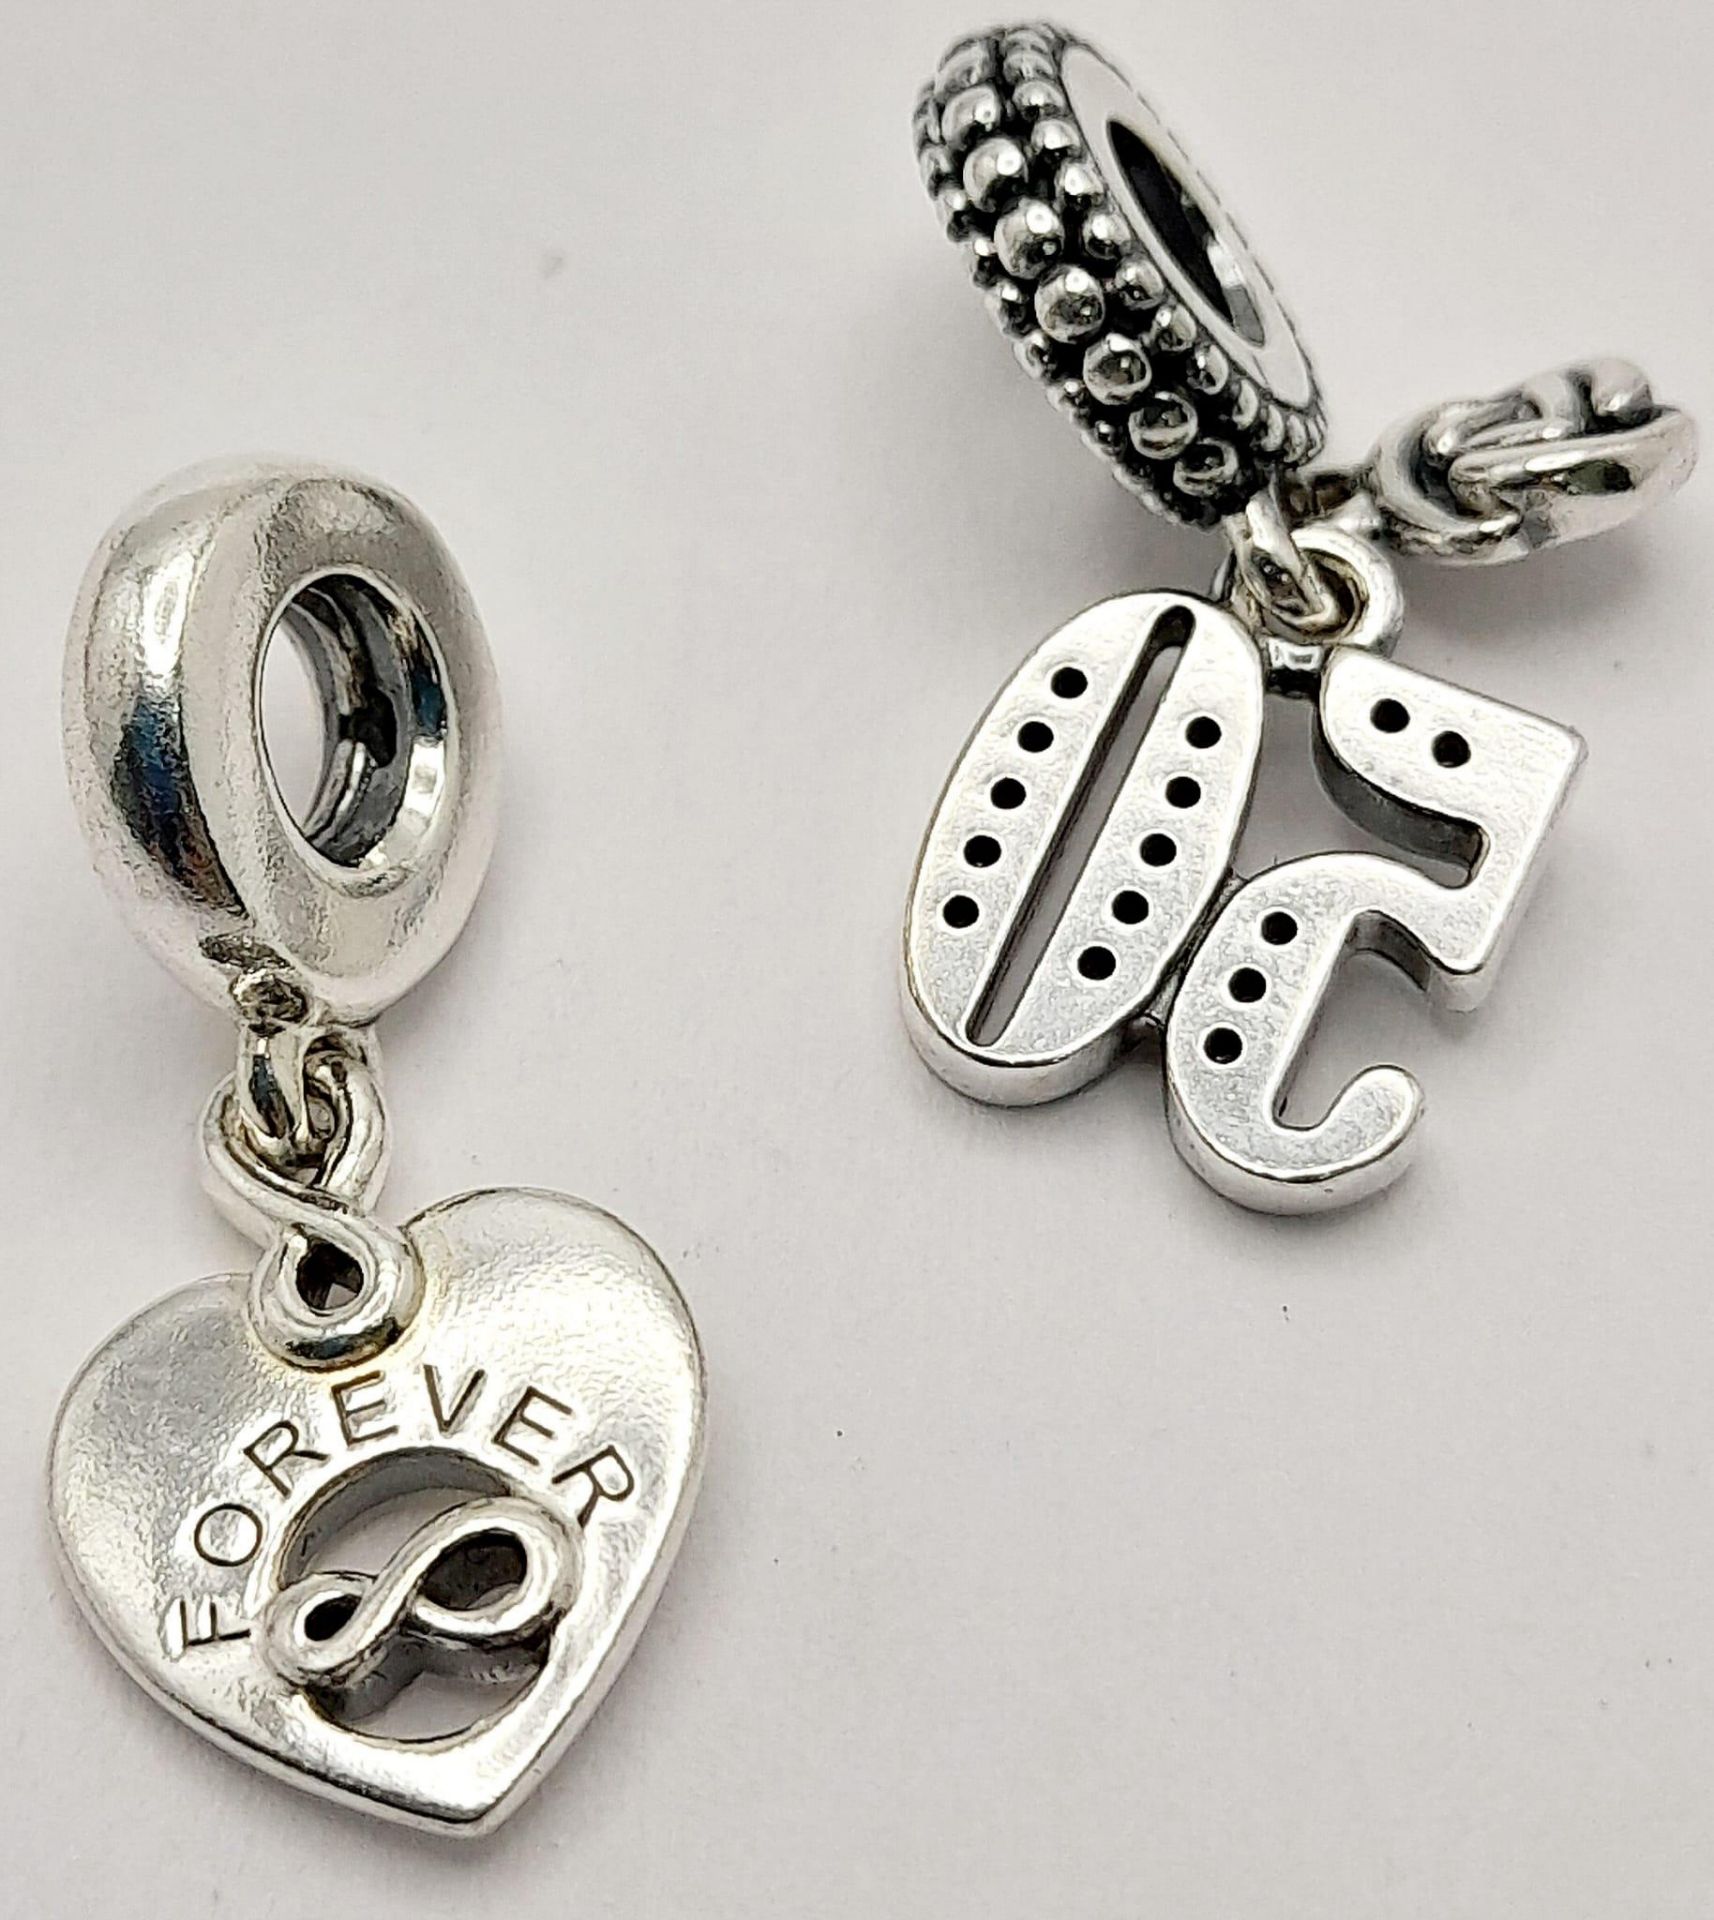 2X fancy Pandora 925 silver charms/pendants include a "Friend Forever" heart and a silver stone - Image 2 of 9